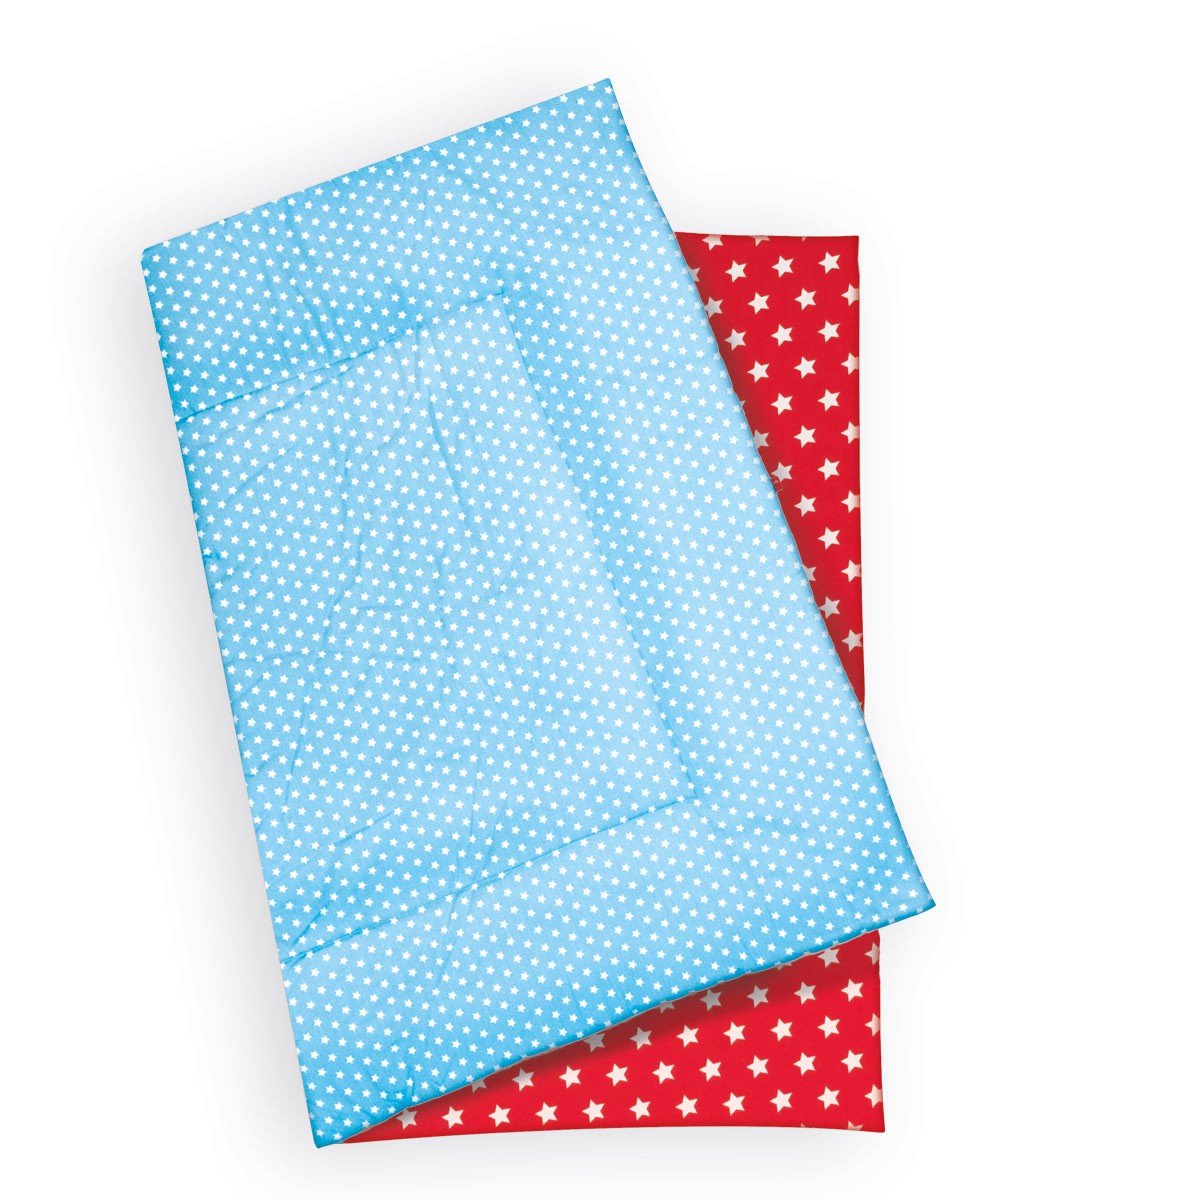 La Fraise Rouge 4251005604618 Pierre Et Jack Light Blue/White and red/White Star Play Mat